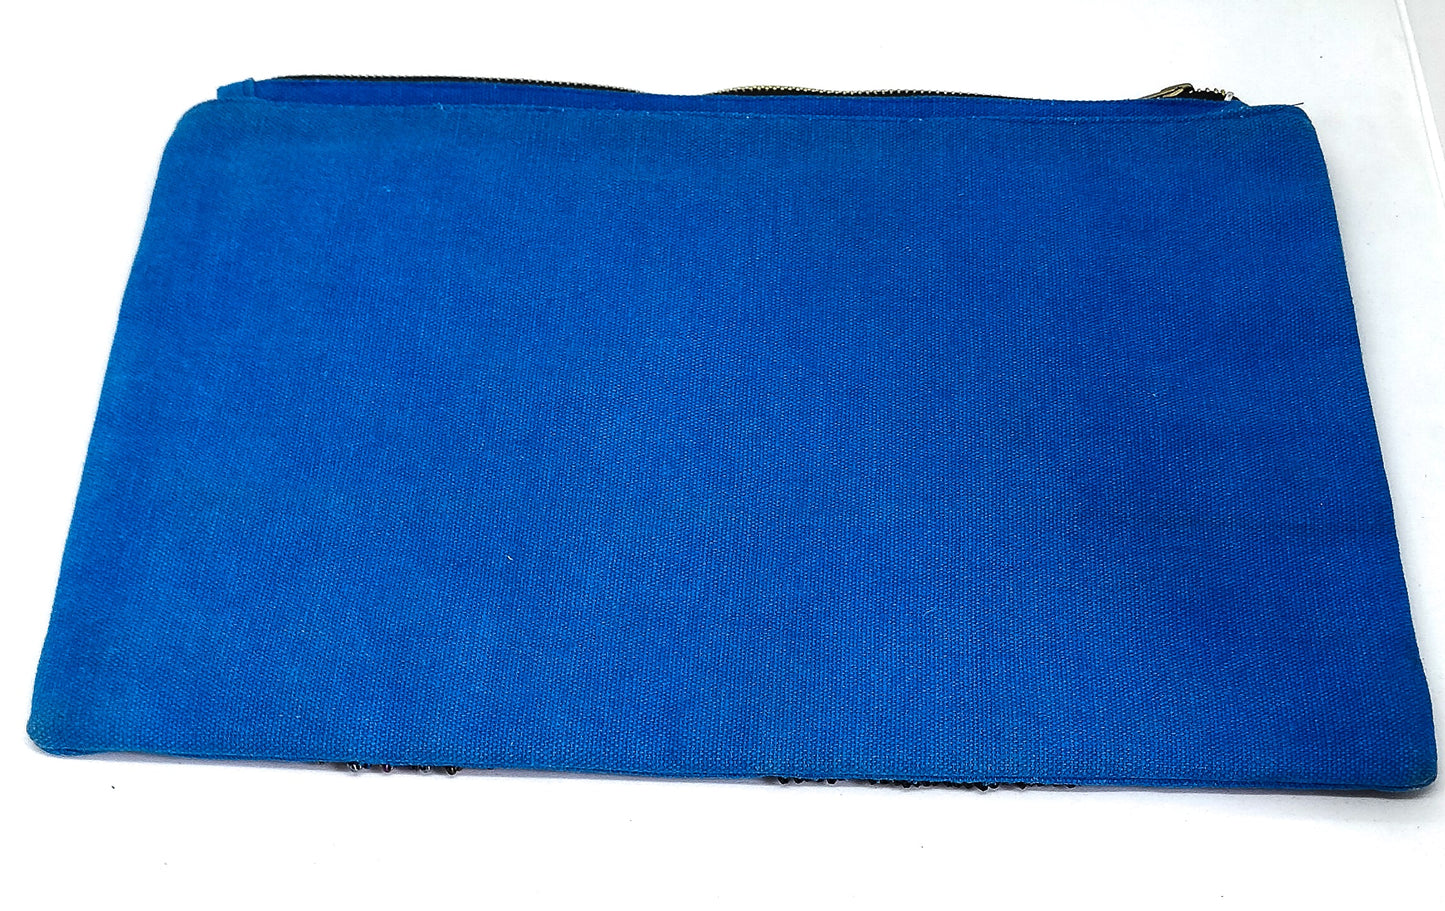 Multi Purpose Blue Canvas Embroidered Bead Pouch Cover